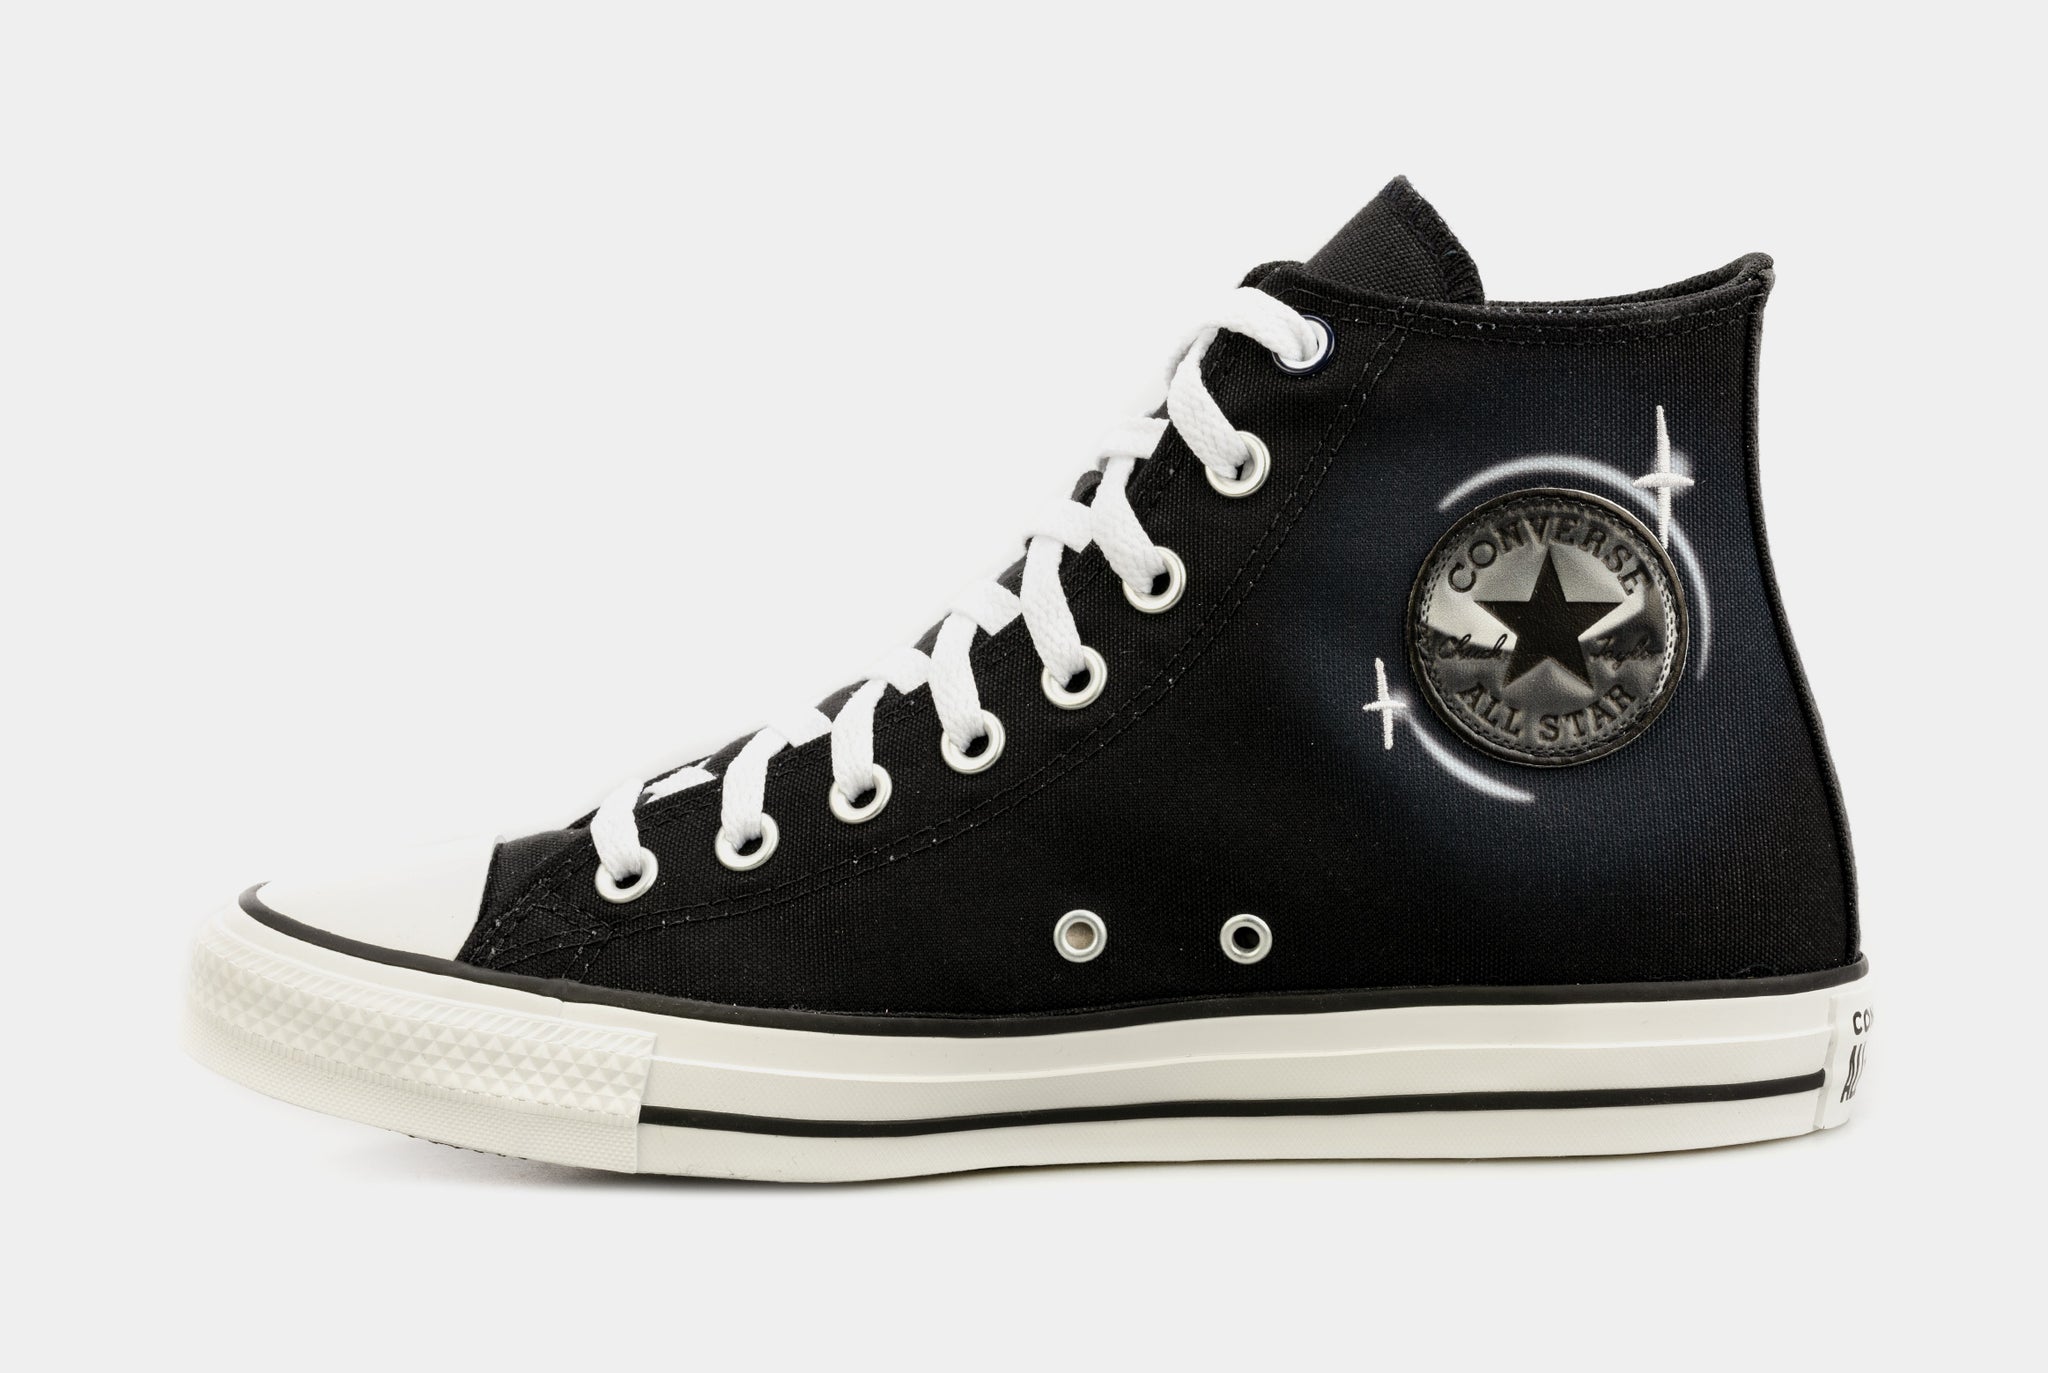 https://www.shoepalace.com/cdn/shop/products/199f8866bb22b0838e7a730cac7c6ec0_2048x2048.jpg?v=1678215398&title=converse-a06005c-chuck-taylor-all-star-high-la-city-mens-lifestyle-shoes-black